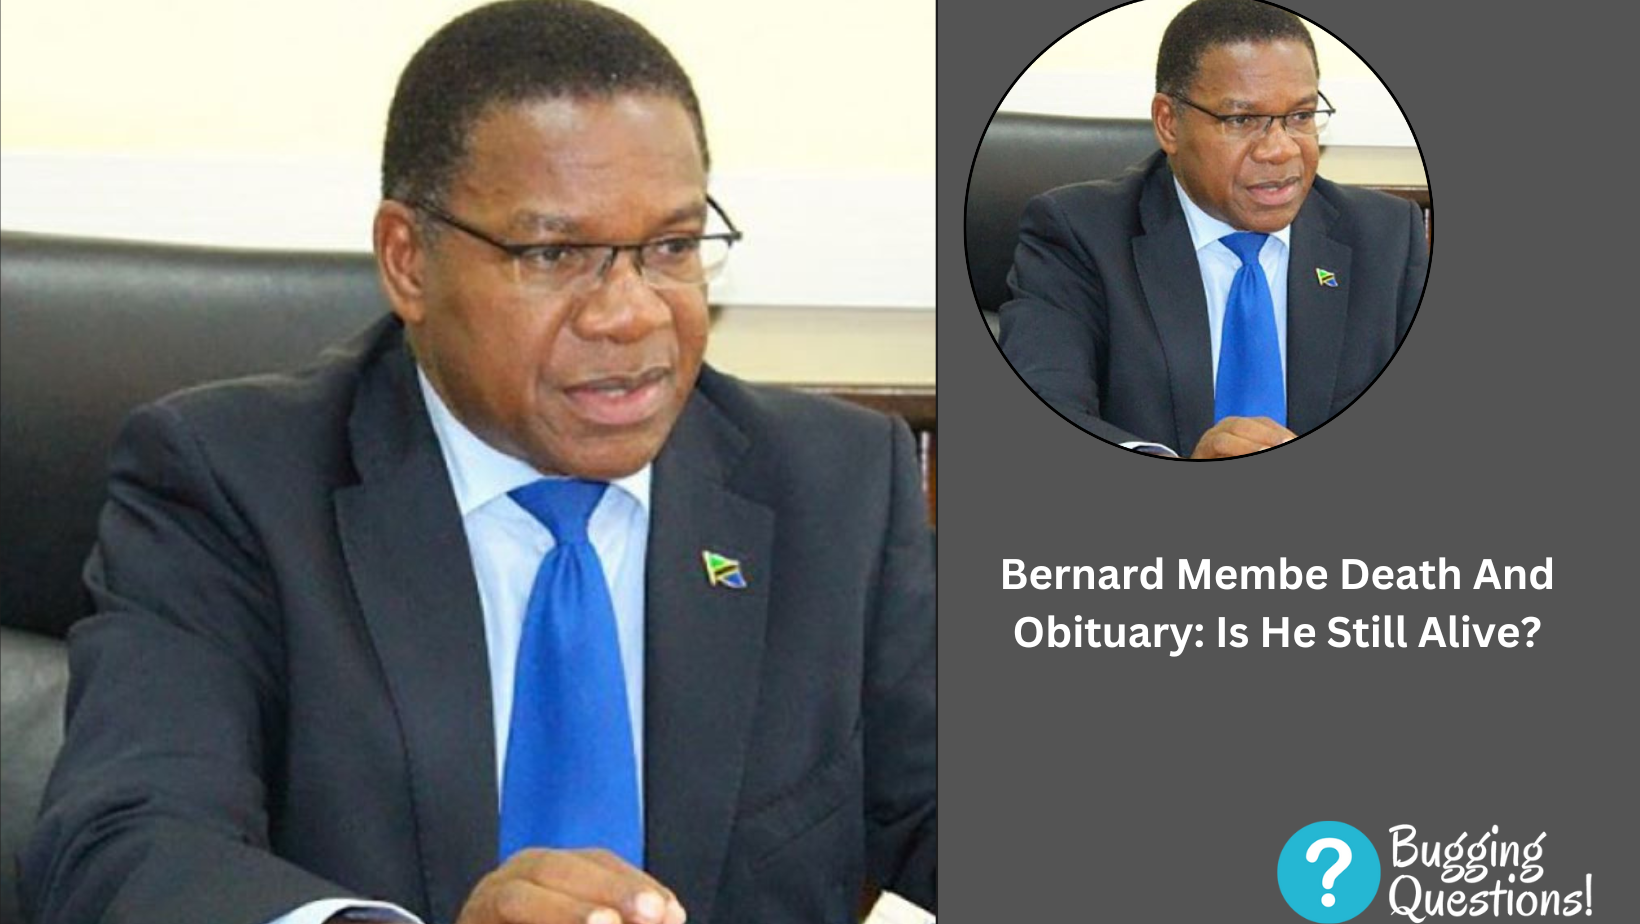 Bernard Membe Death And Obituary: Is He Still Alive?